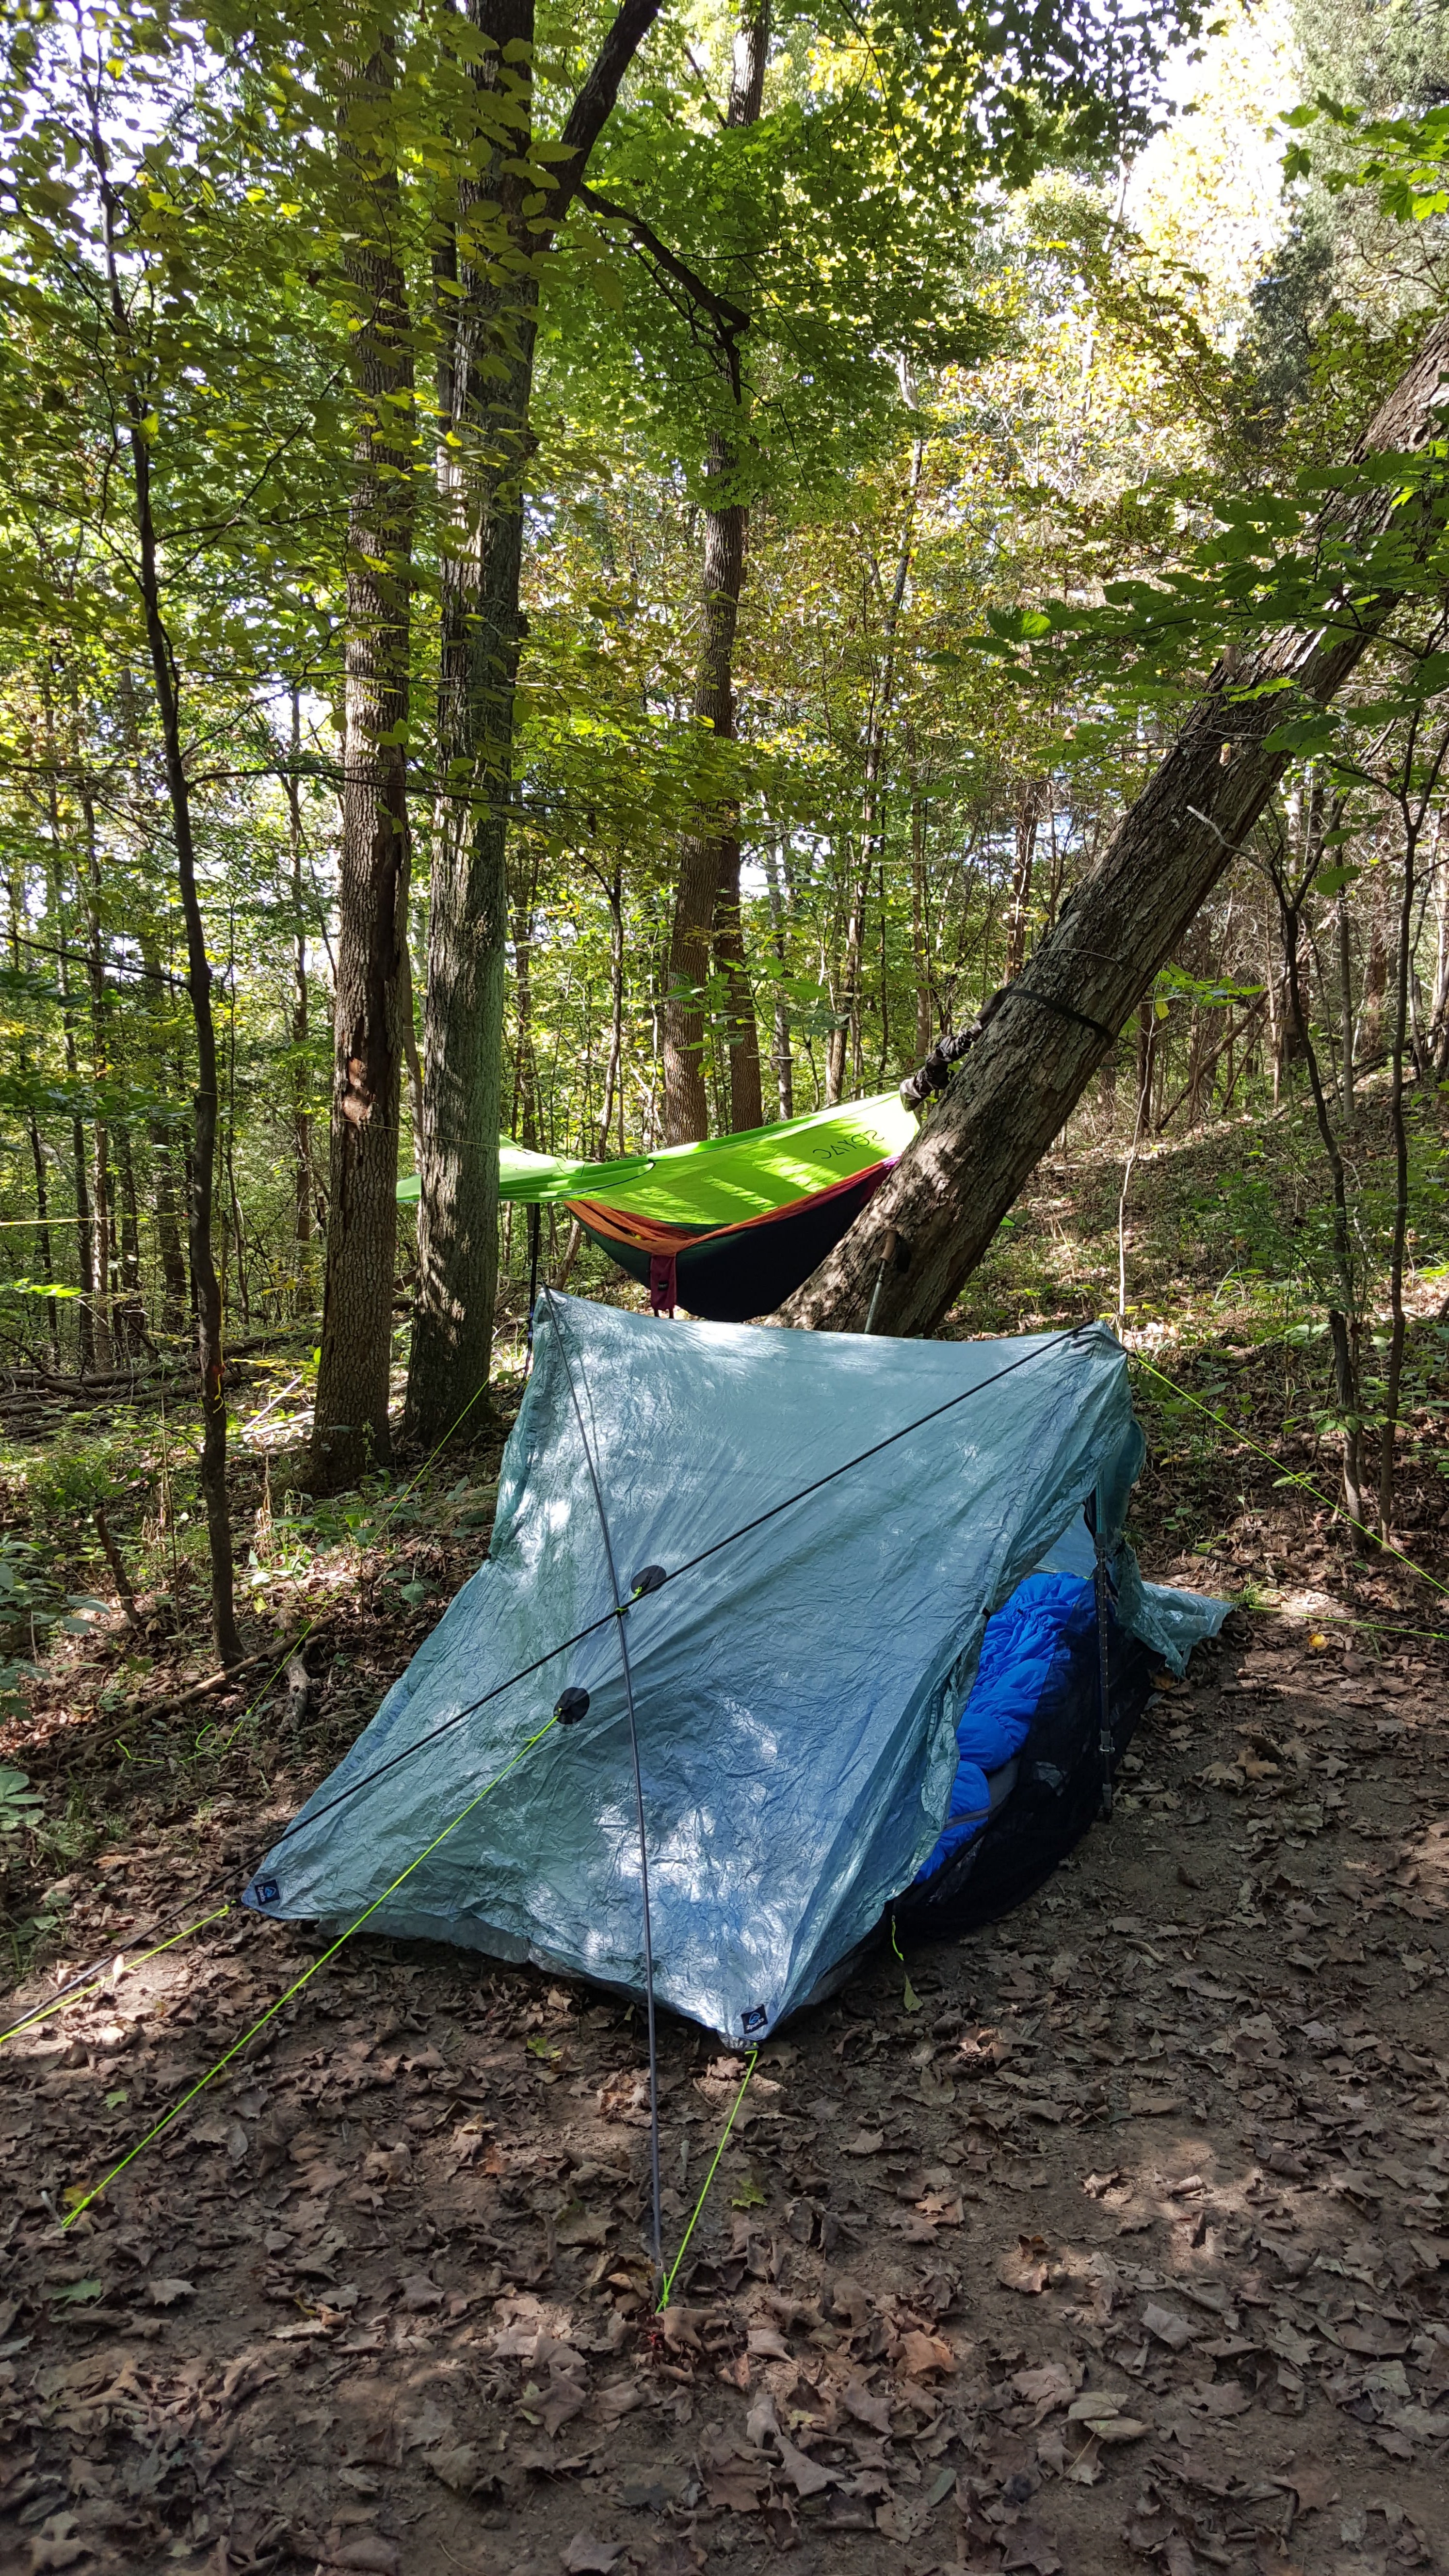 Backpacking camp sites are small but ample.  I was able to set up my tent and hang out in a near by hammock.